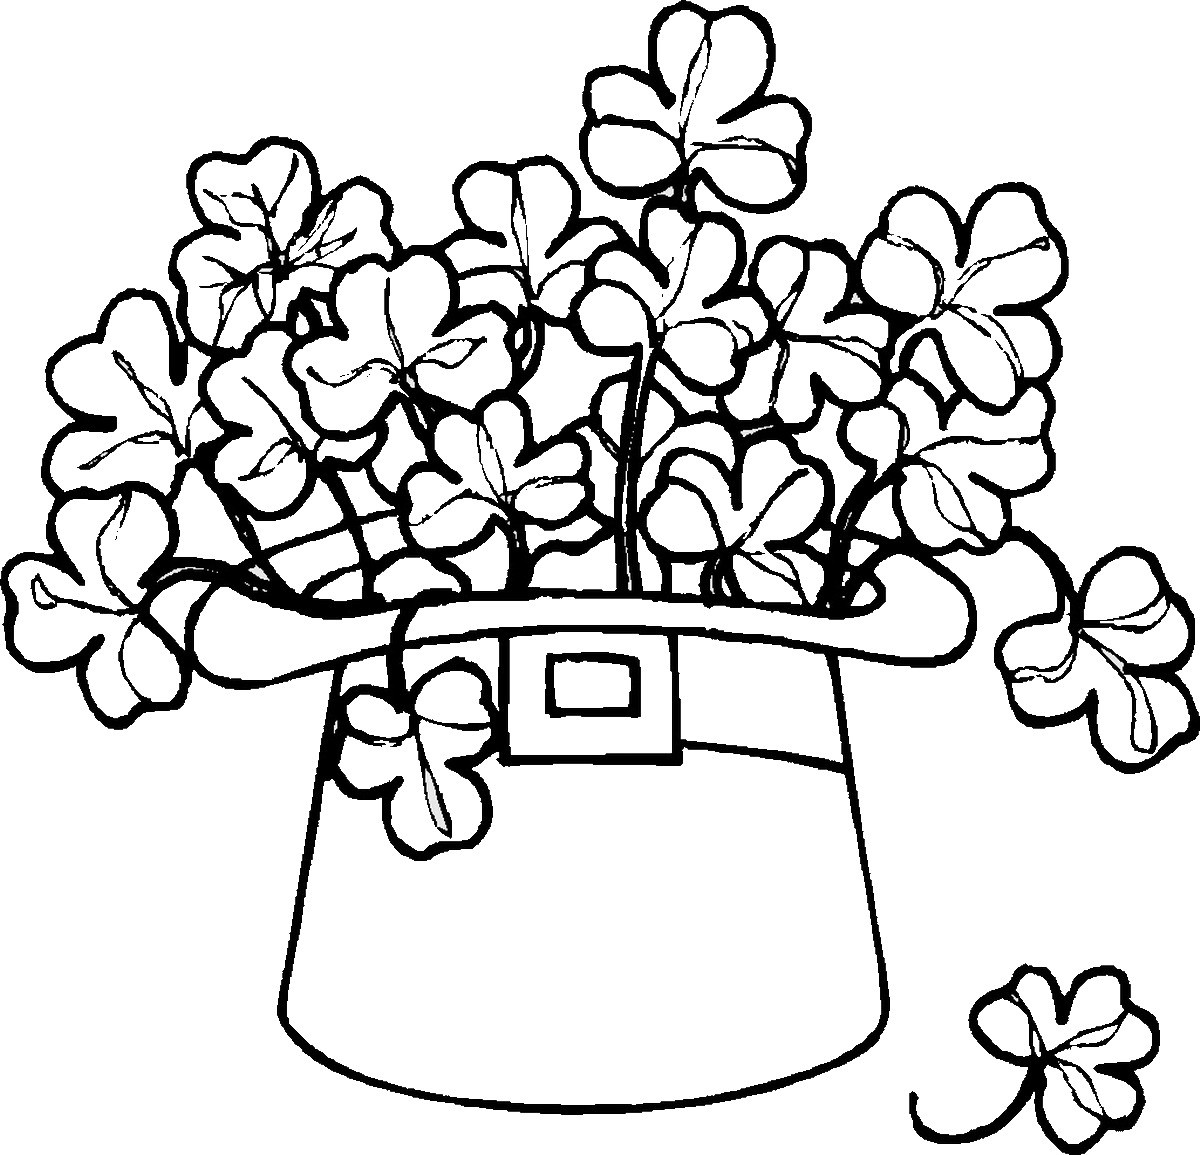 St. Patrick'S Day Coloring Sheets For Kids
 St Patrick s Day Coloring Pages for childrens printable